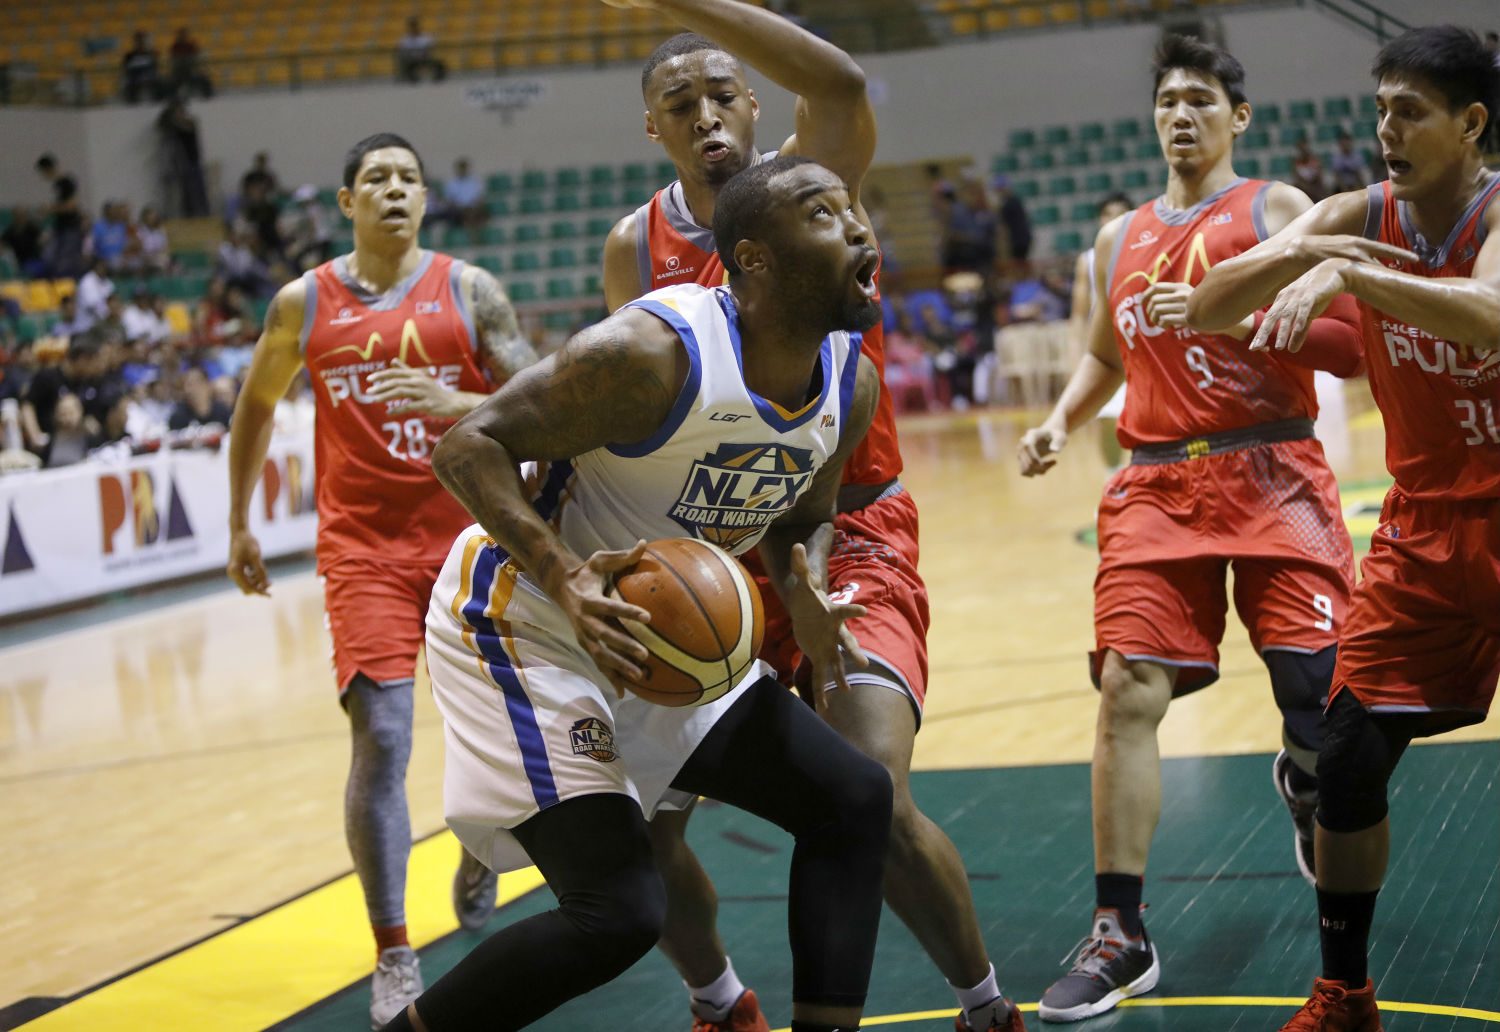 NLEX nabs first win, ends 3-game slide at Phoenix’s expense